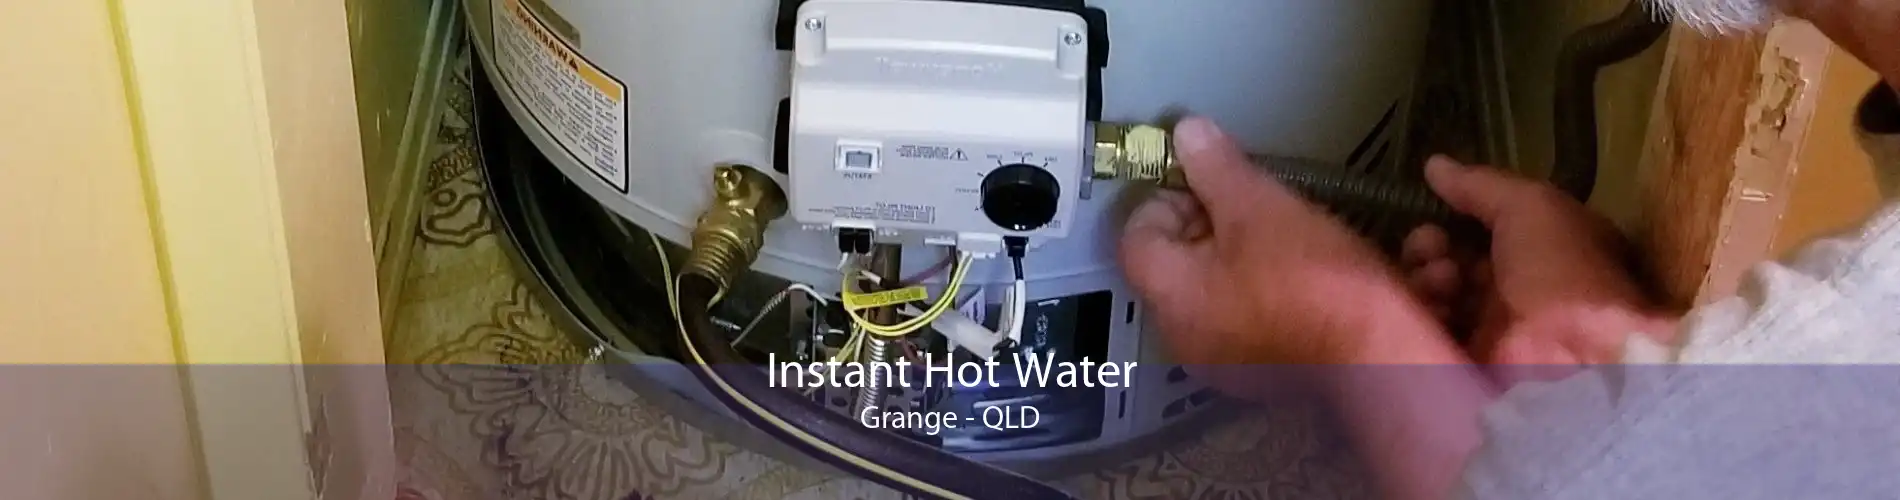 Instant Hot Water Grange - QLD